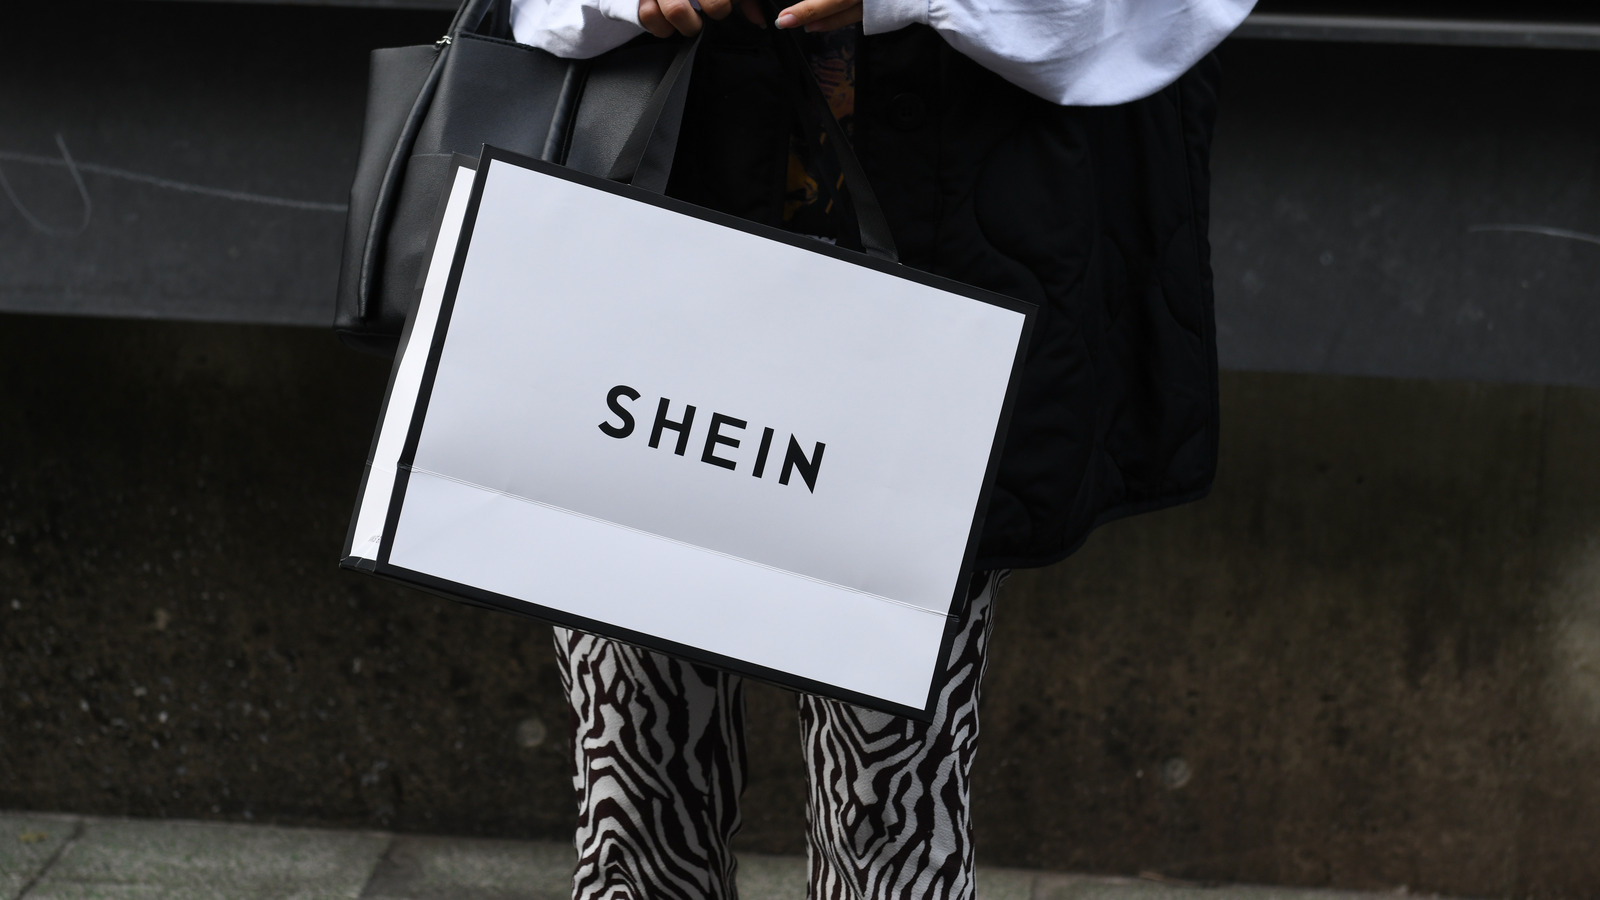 Shein's Fashion Lookalikes Are Sparking Legal Controversy - Here's What ...